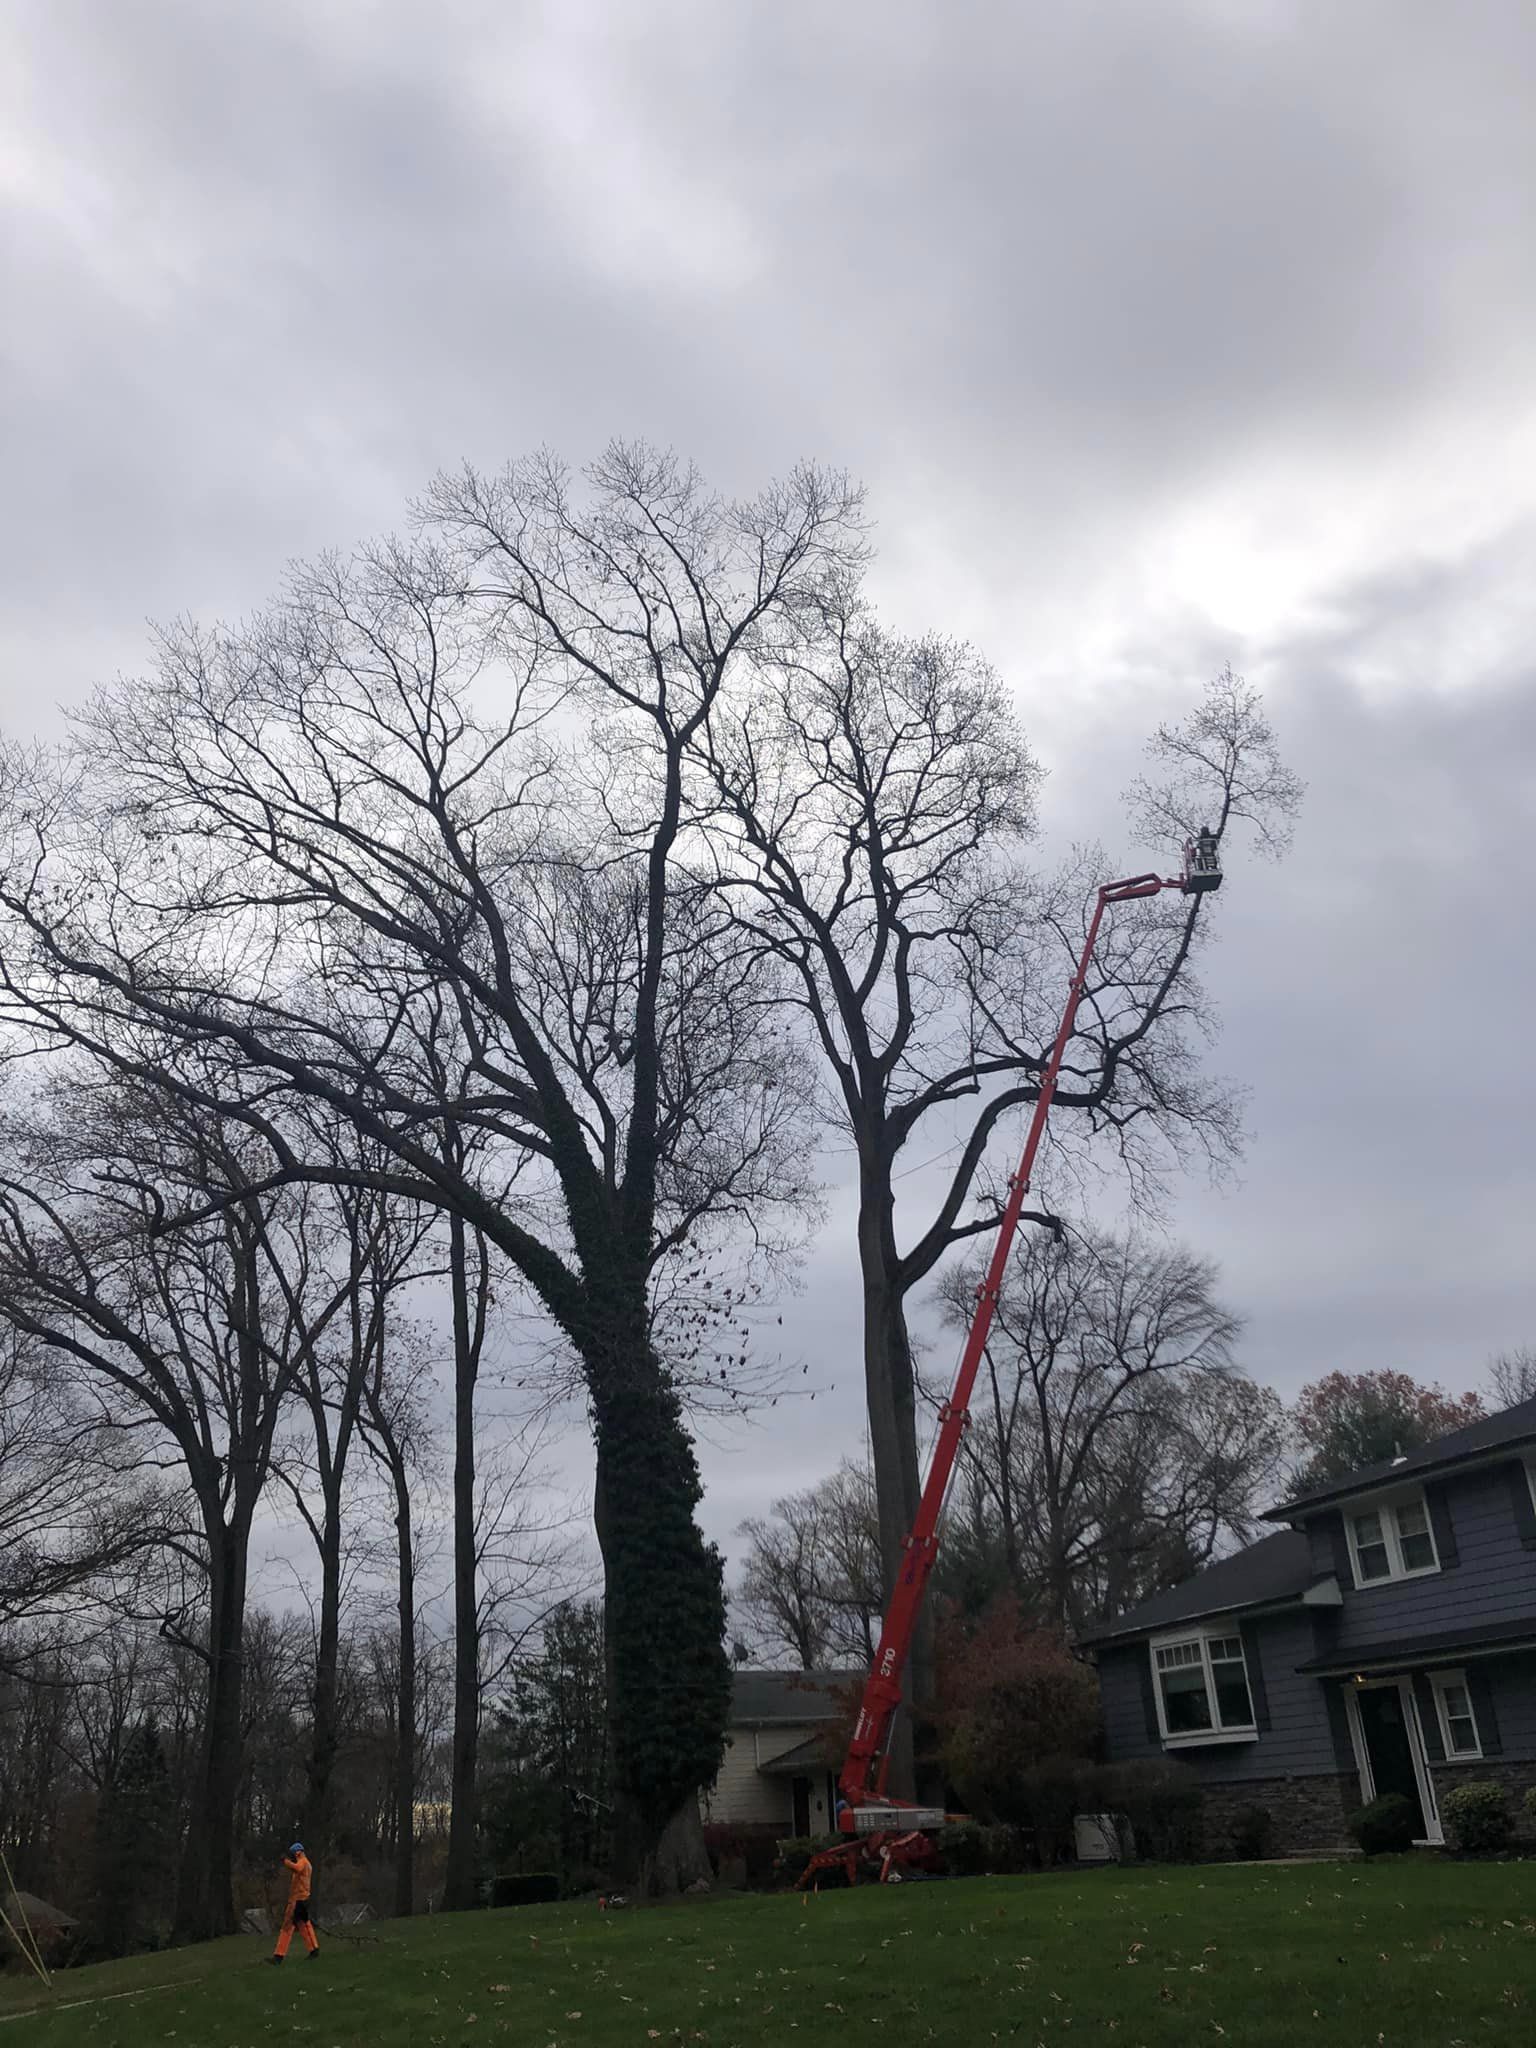 Cook's Tree Services Inc 366B Everett Rd, Lincroft New Jersey 07738